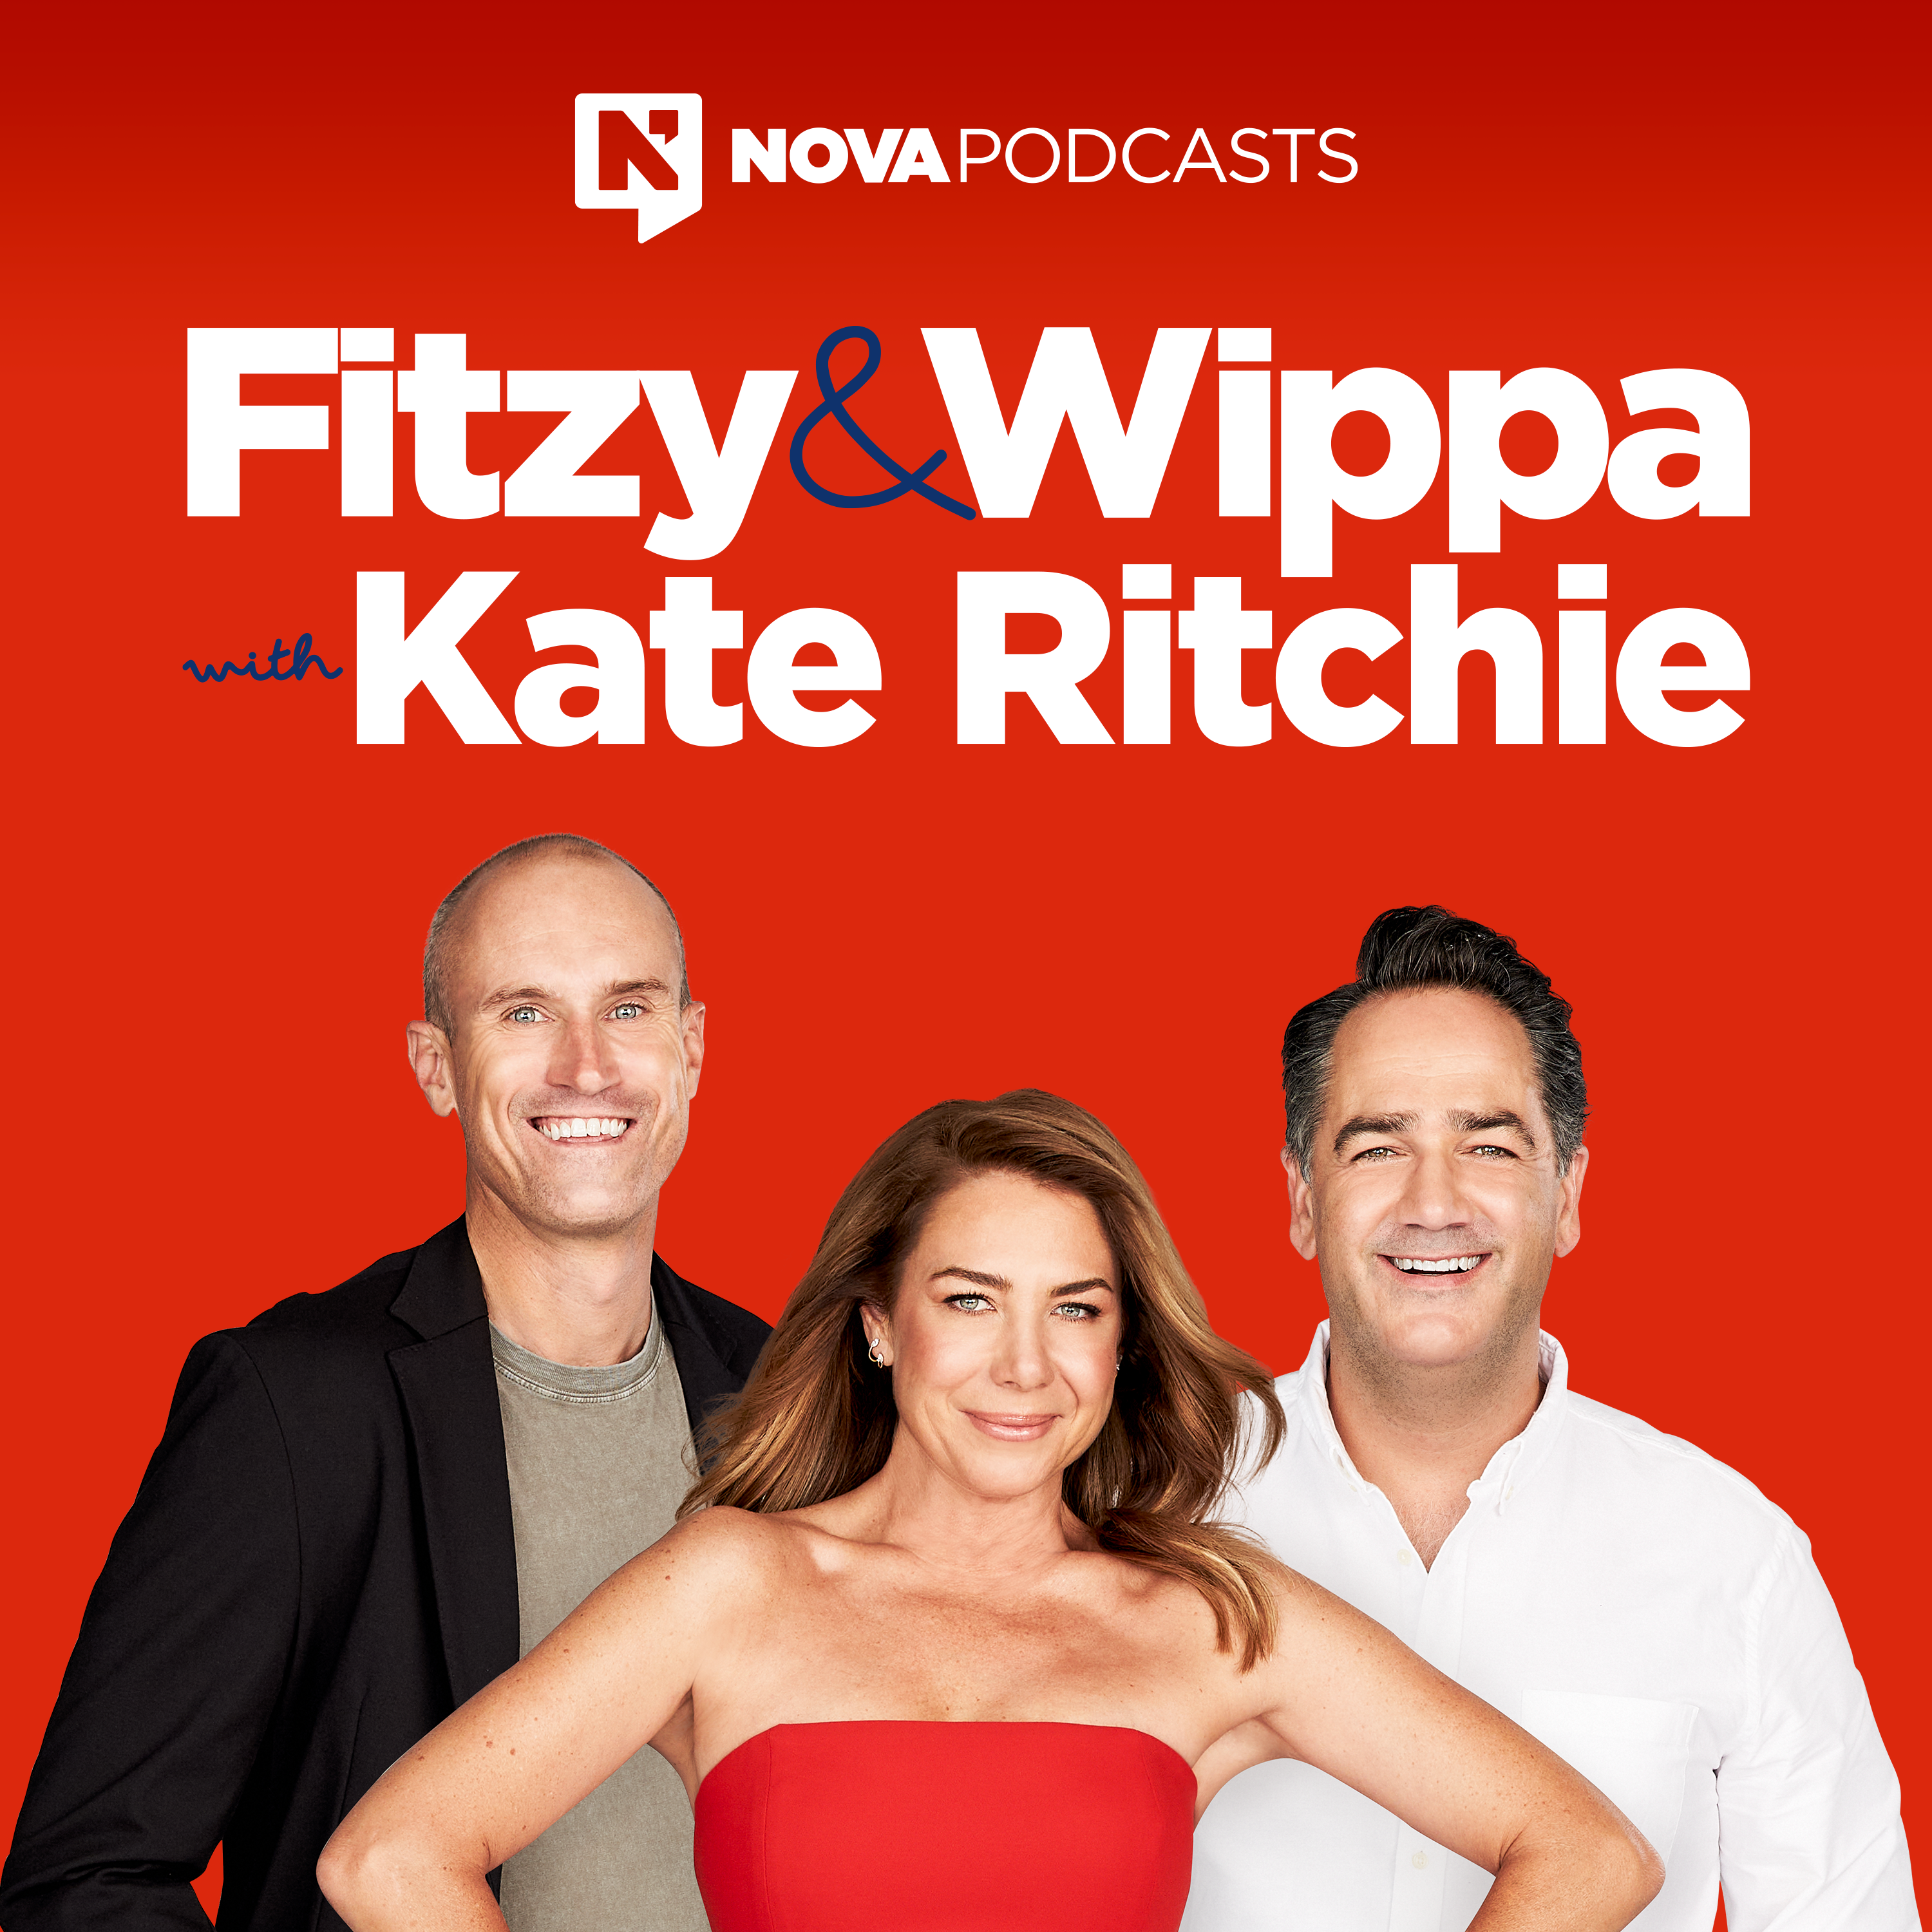 BONUS: Wippa’s Only Just Discovered… What? (Recap)